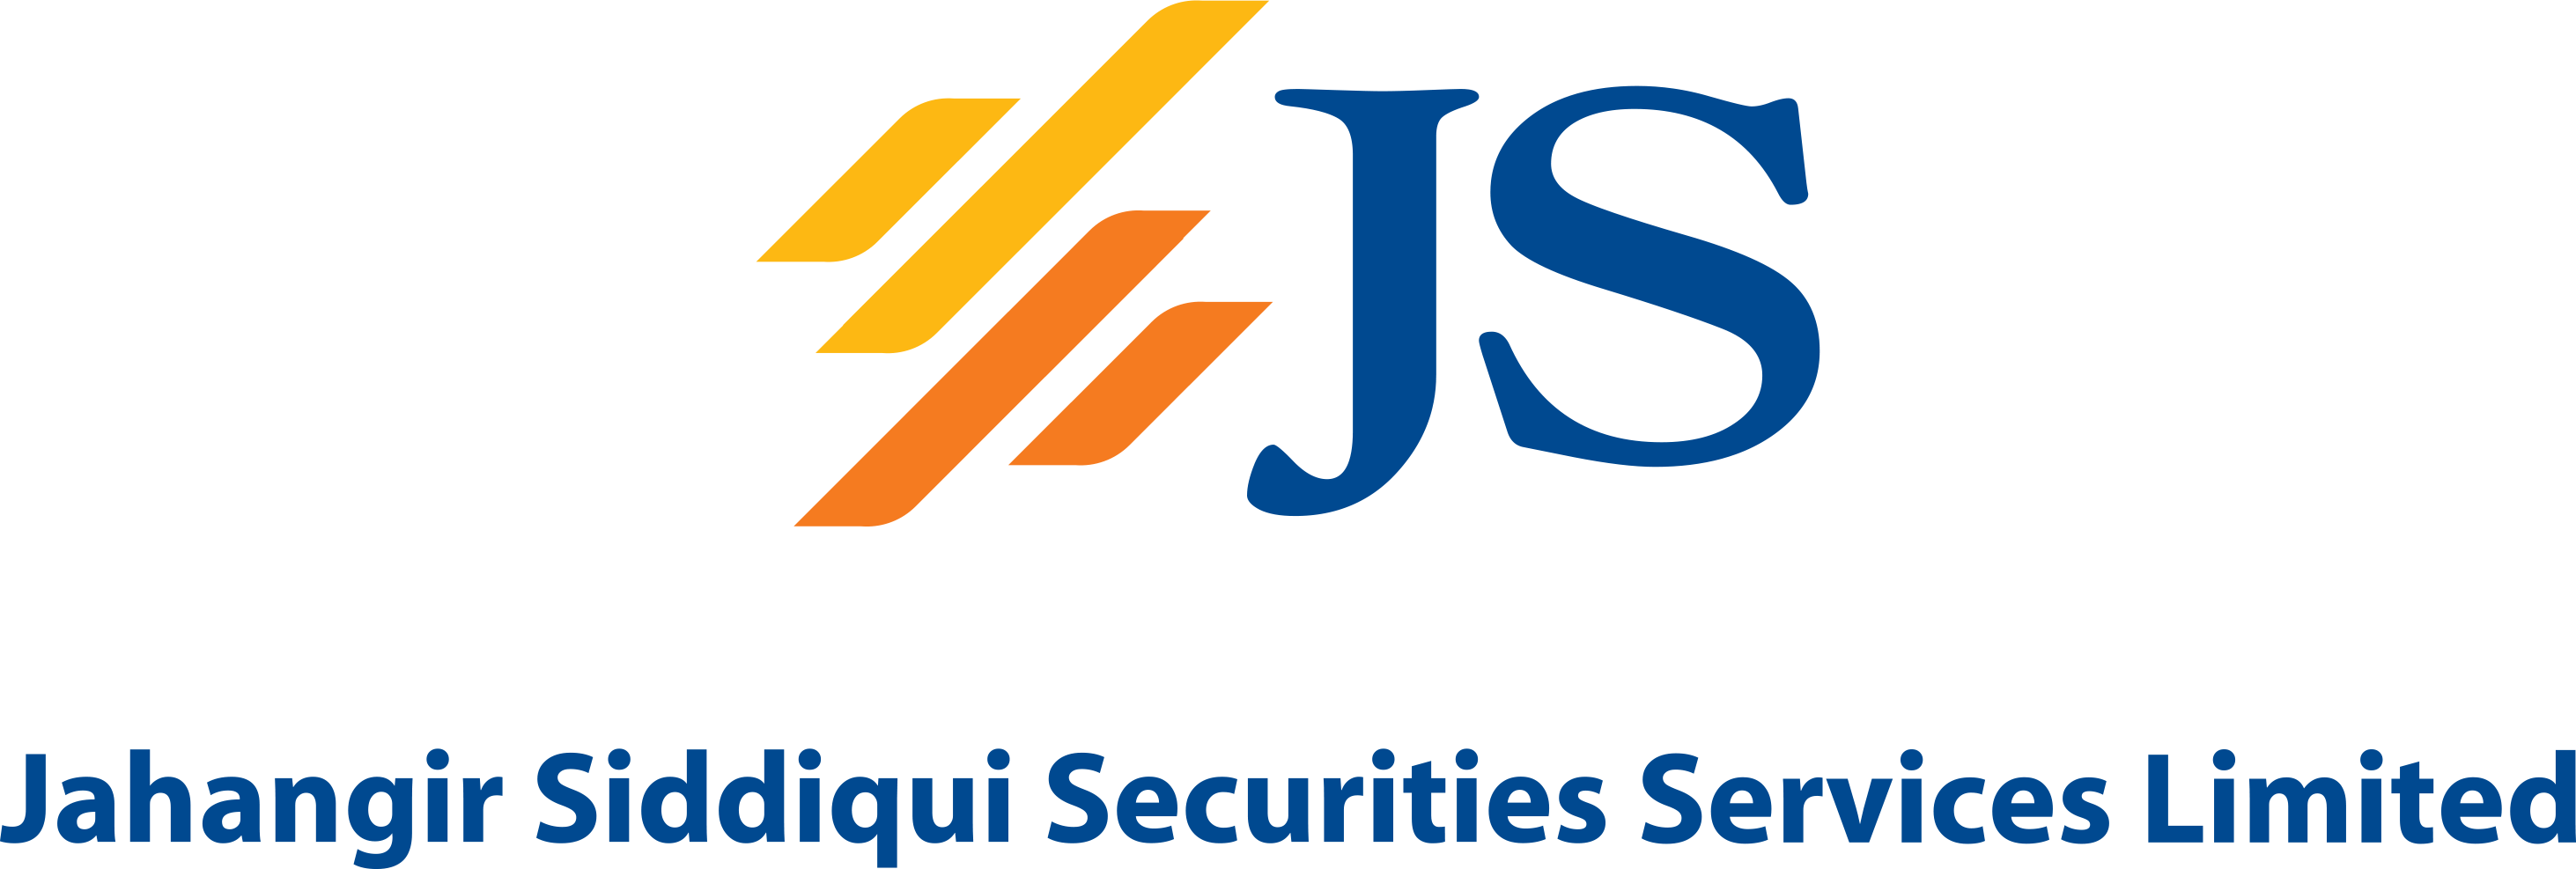 Jahangir Siddiqui Securities Services Limited